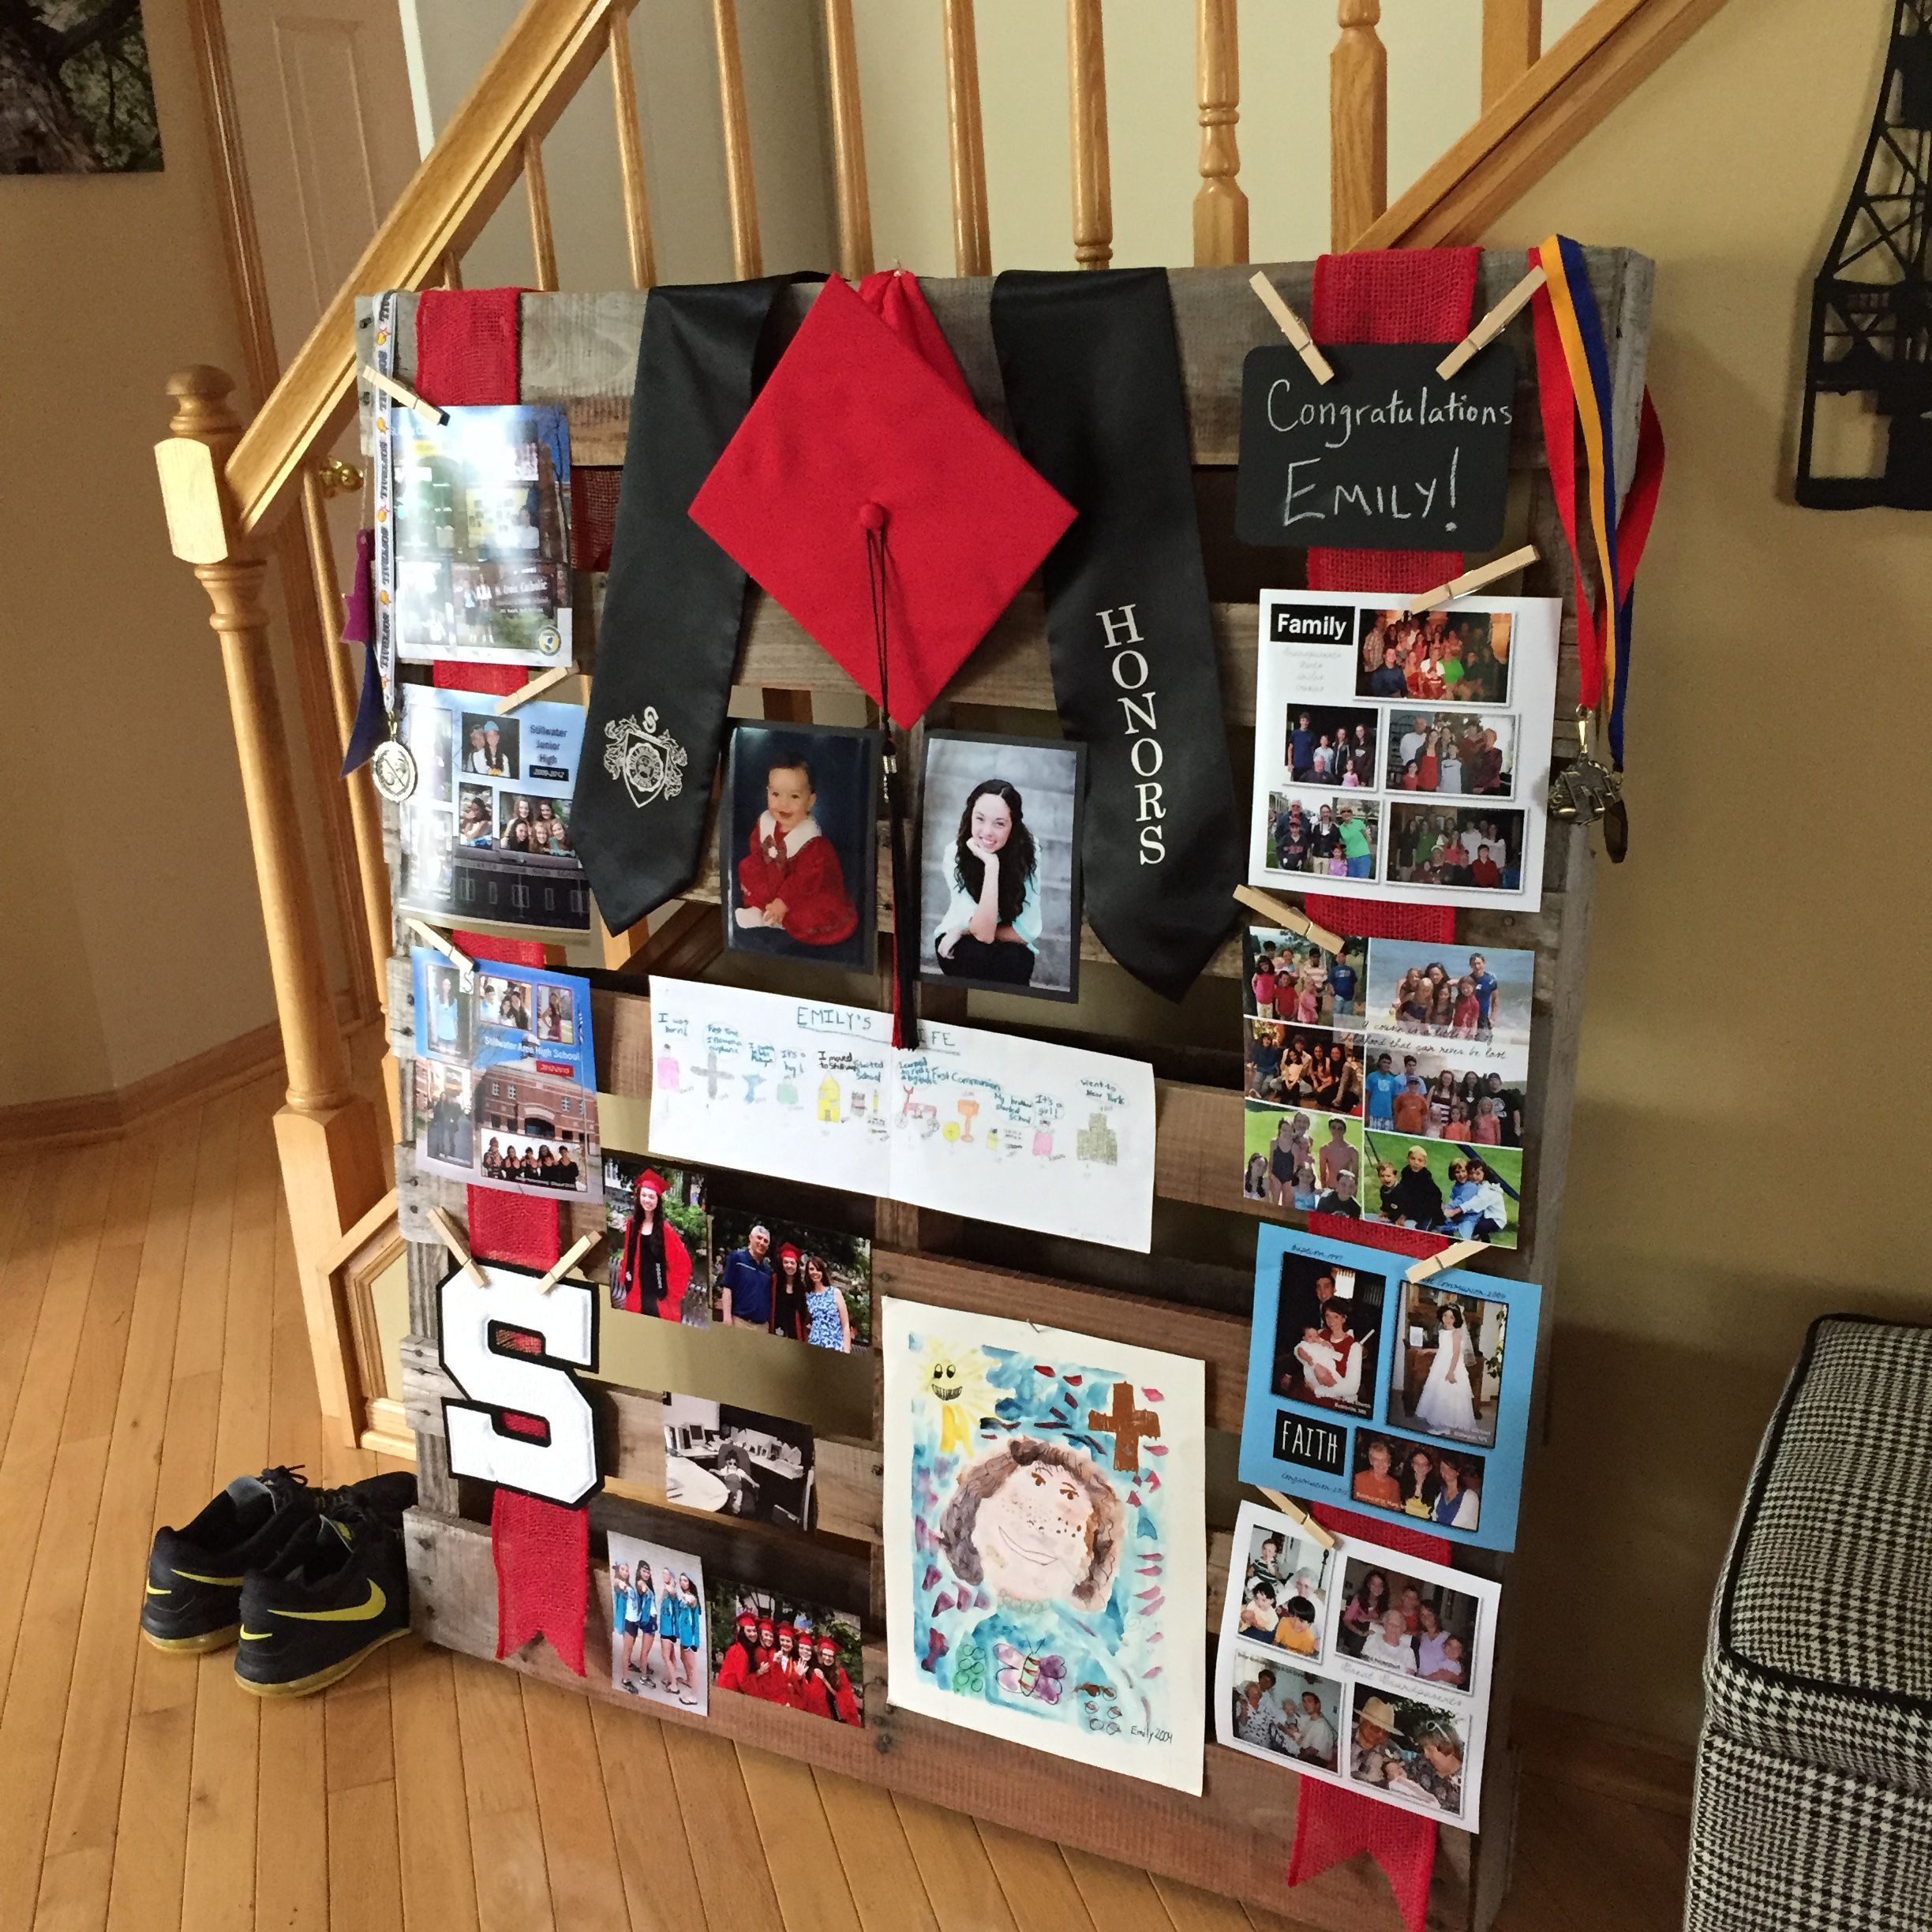 Graduation Party Picture Display Ideas
 Fun graduation display made from a wooden pallet